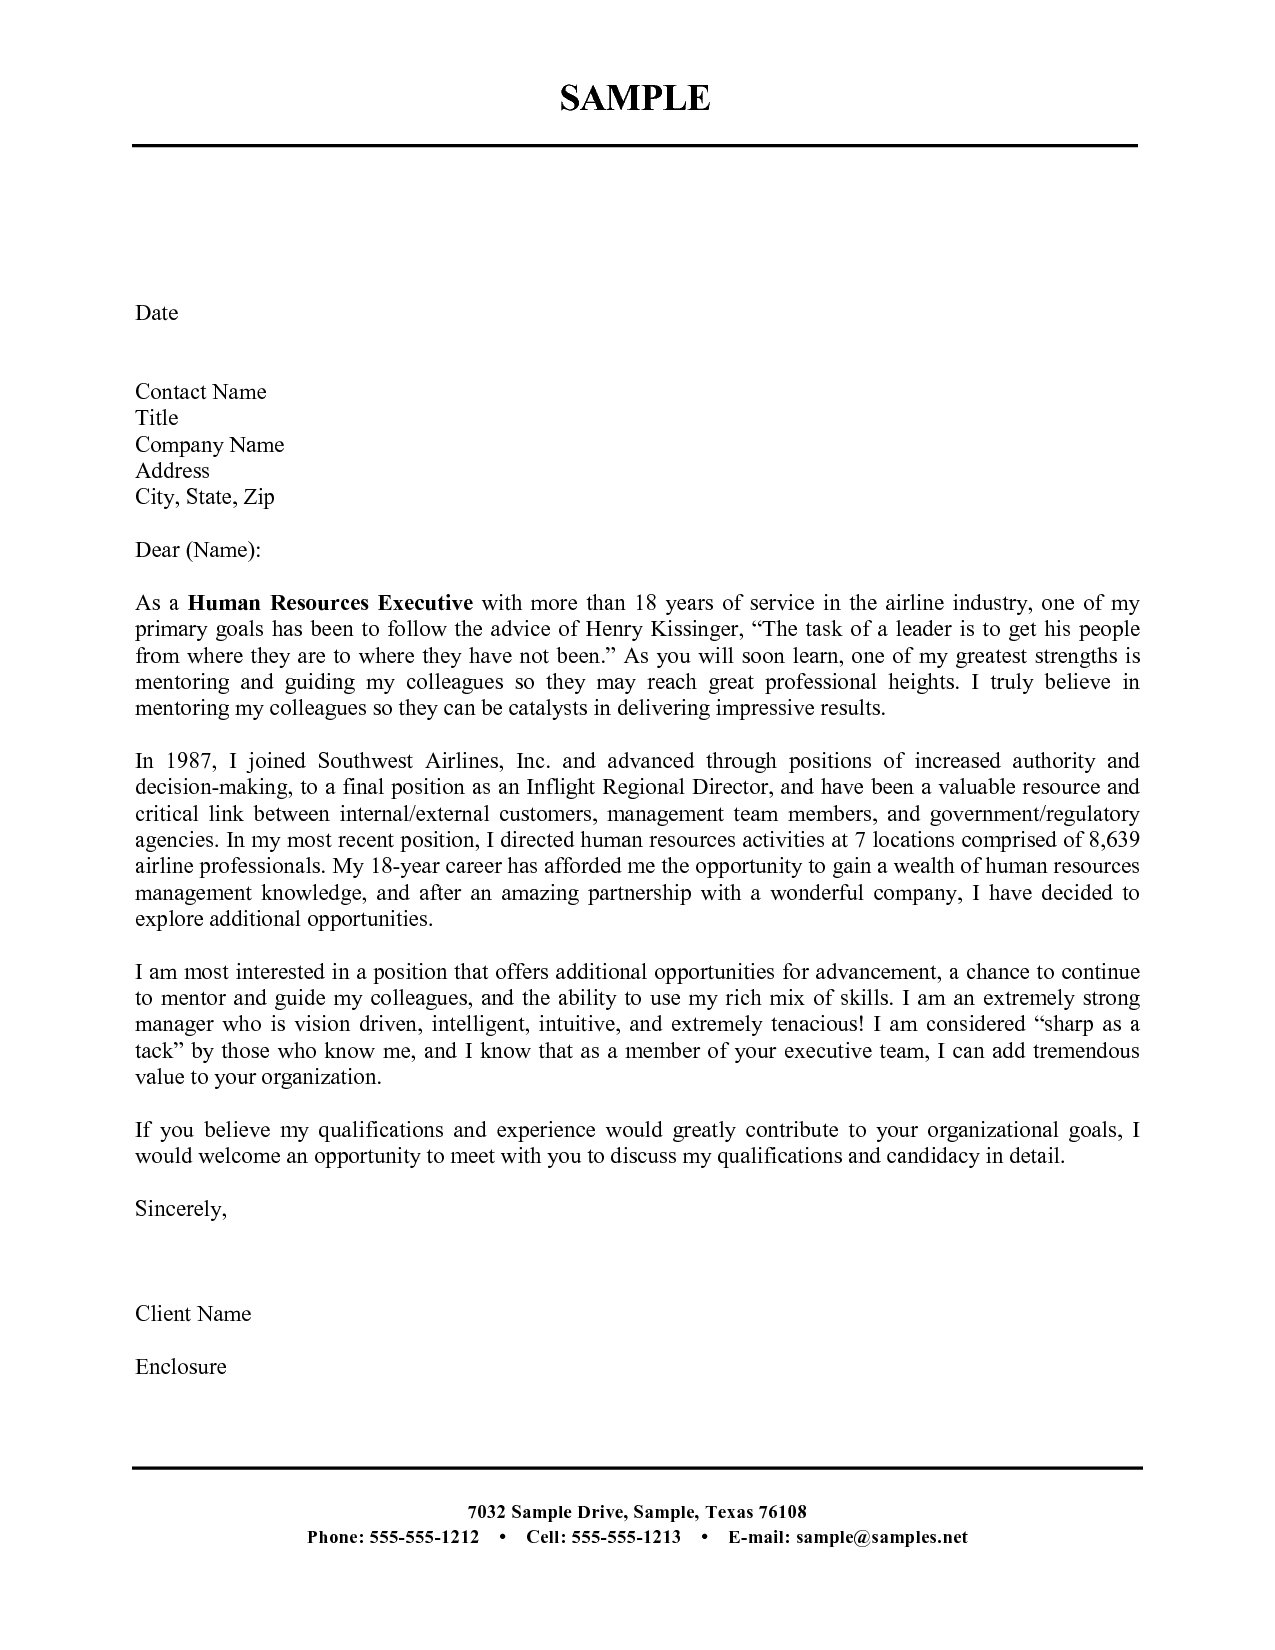 download cover letter template in microsoft word